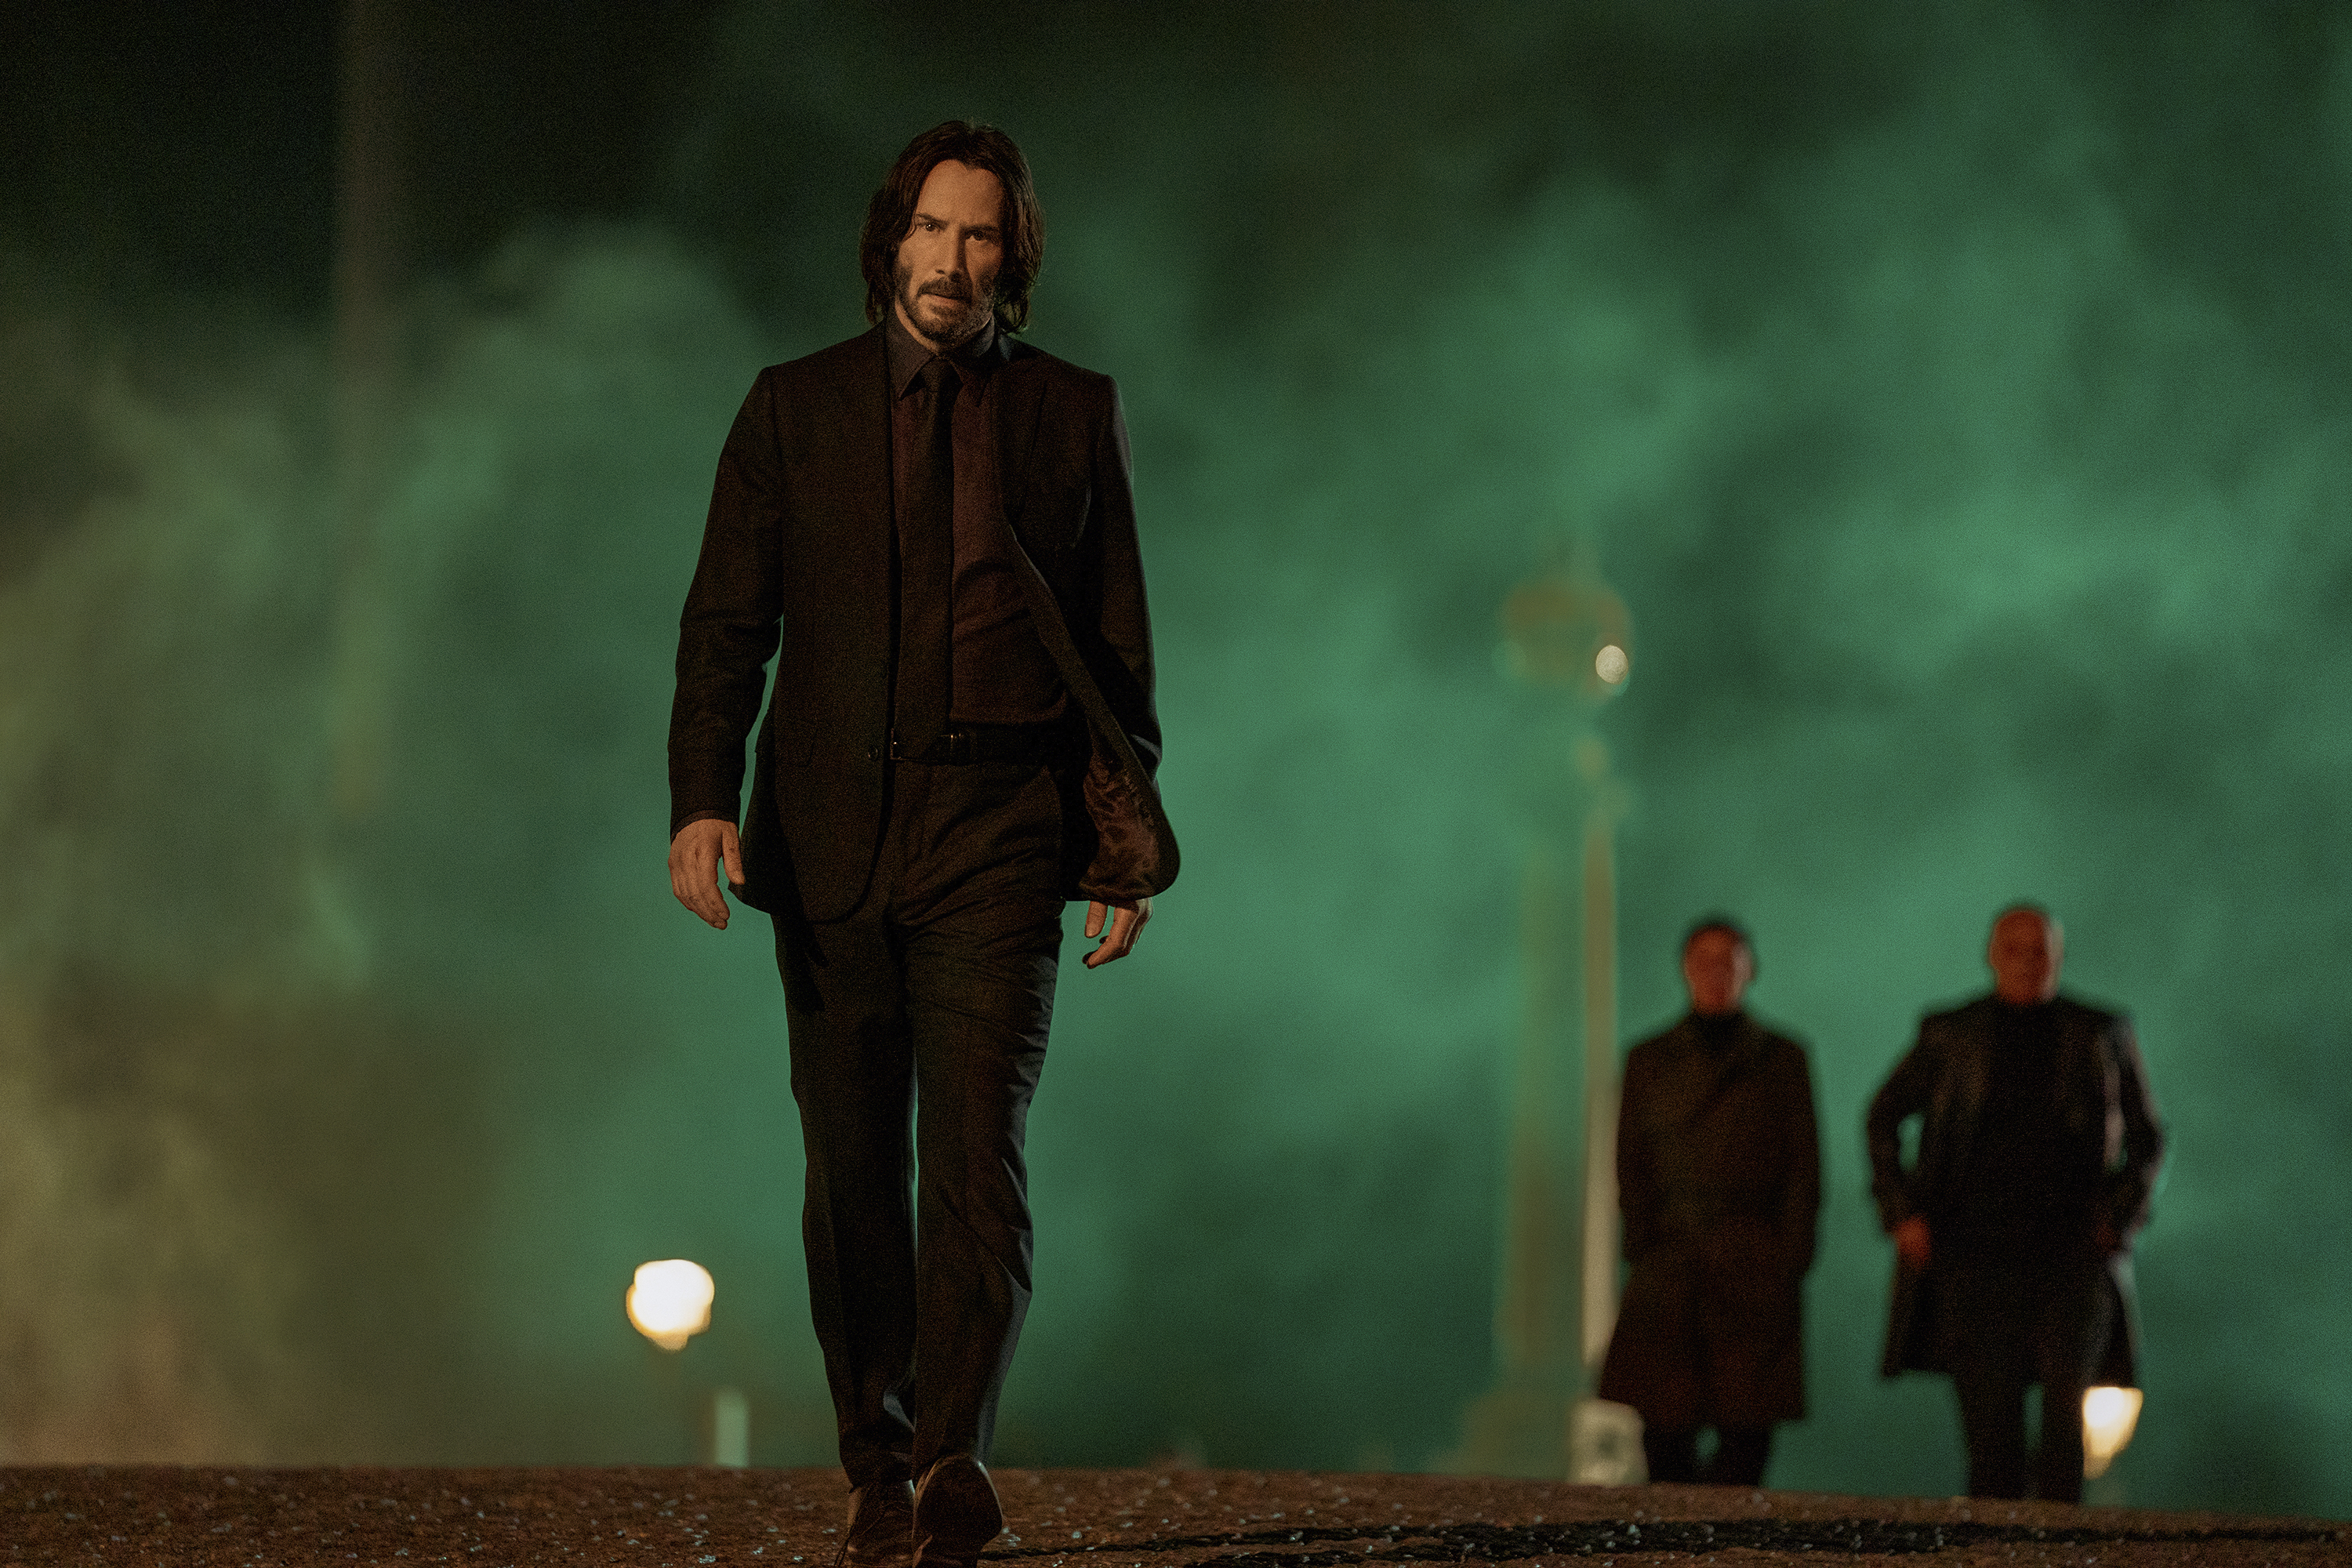 Movie Review: John Wick – The Flame